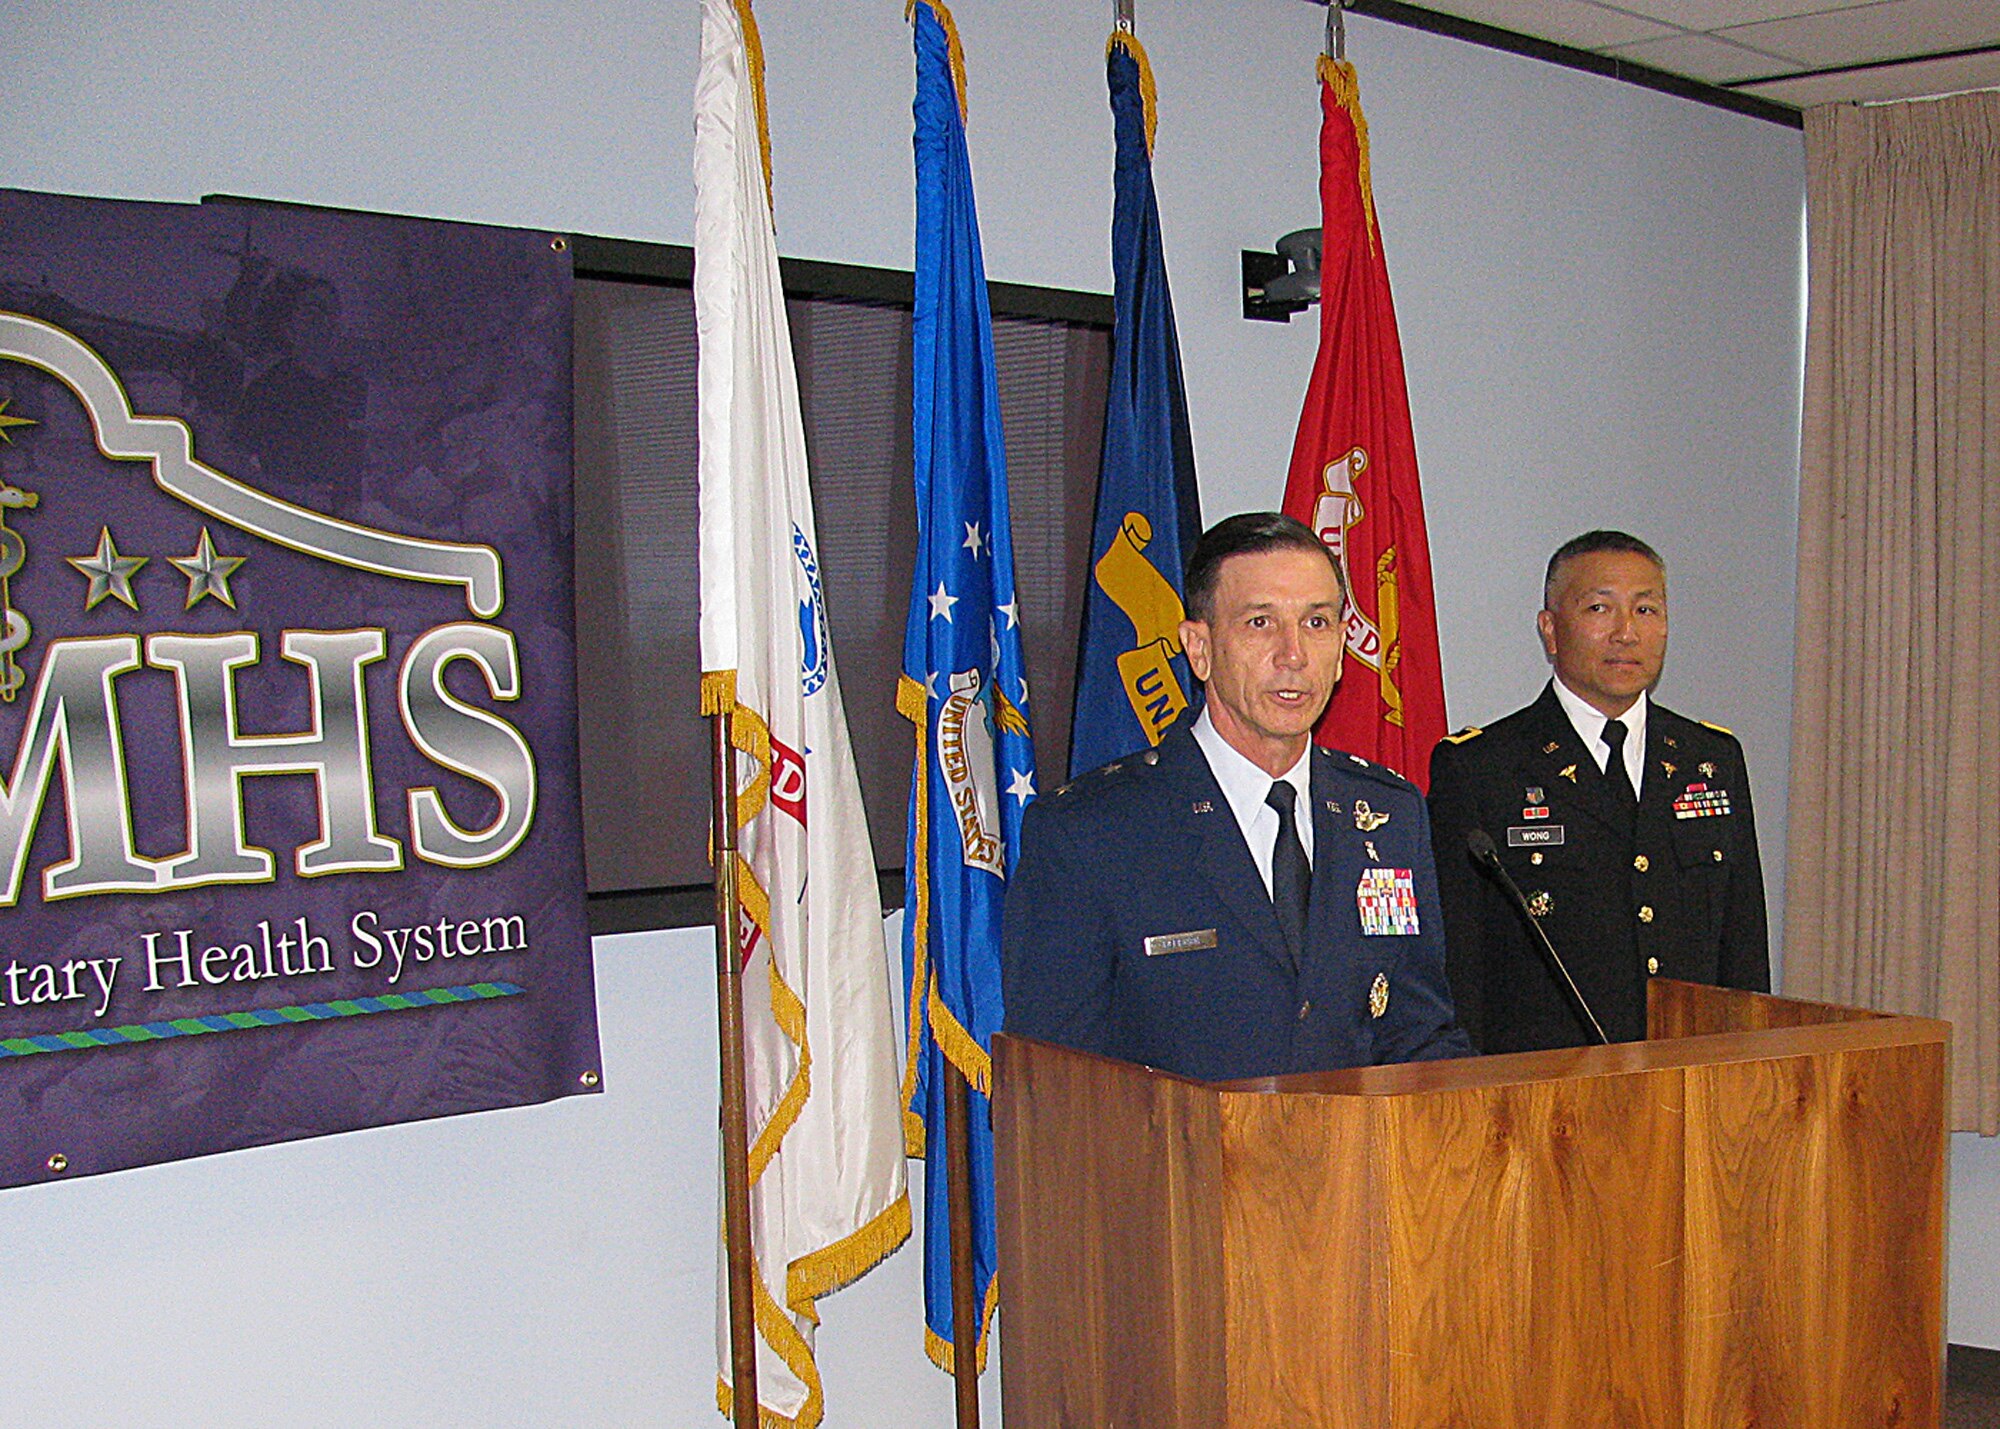 Air Force Maj. Gen. Byron Hepburn (left), 59th Medical Wing commander, and Army Maj. Gen. Ted Wong, Southern Regional Medical Command and Brooke Army Medical Center commander, announce the new San Antonio Military Health System Sept. 16, 2011, at a press conference in San Antonio, Texas. The new SAMHS will oversee all Army and Air Force medical treatment facilities in the San Antonio metropolitan area. Hepburn is the first director of the SAMHS and Wong is now the new deputy director of SAMHS. (US Air Force photo by Ron Rogers)